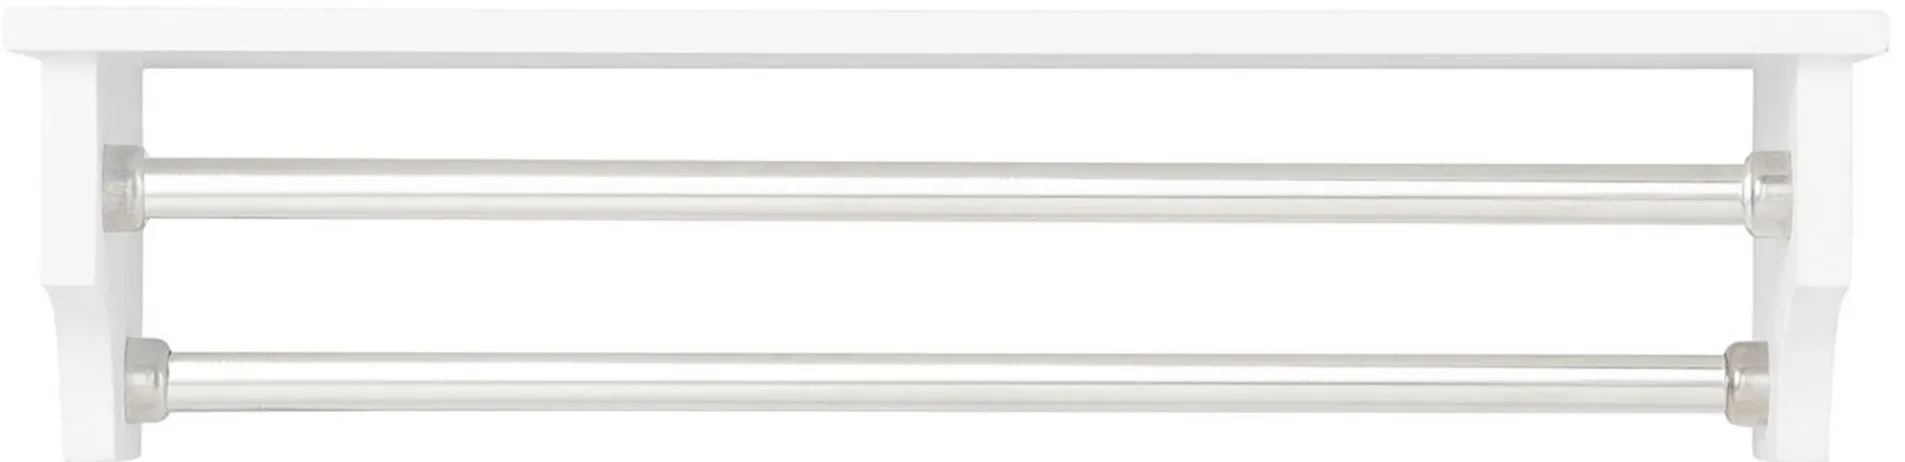 Dover Bathroom Shelf w/ Towel Rods in White by Bolton Furniture